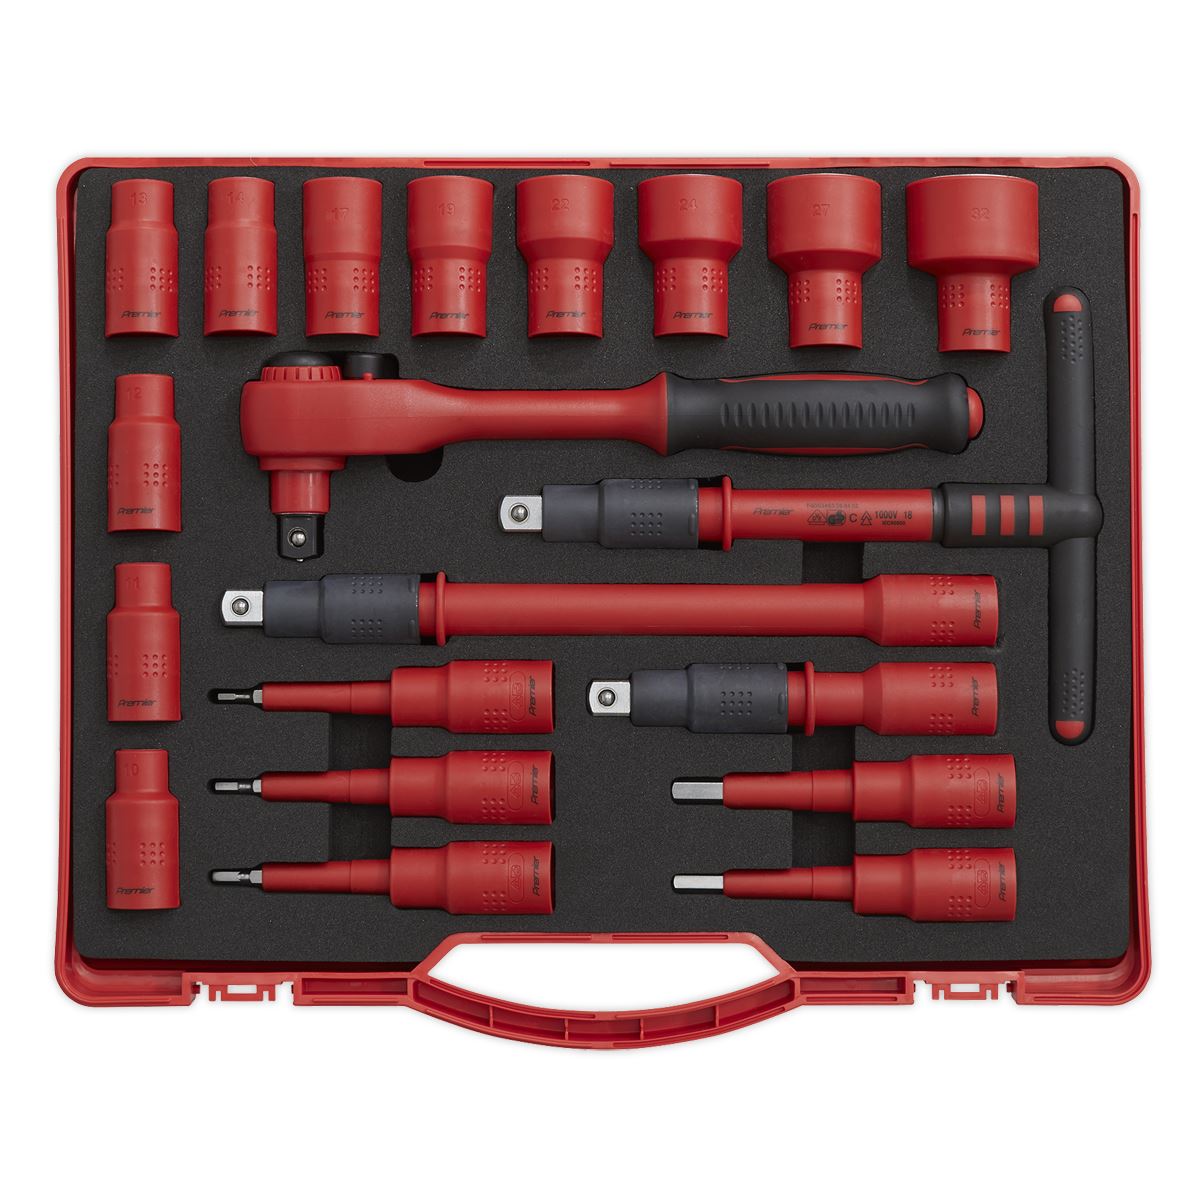 Sealey Premier Insulated Socket Set 20pc 1/2"Sq Drive WallDrive® VDE Approved